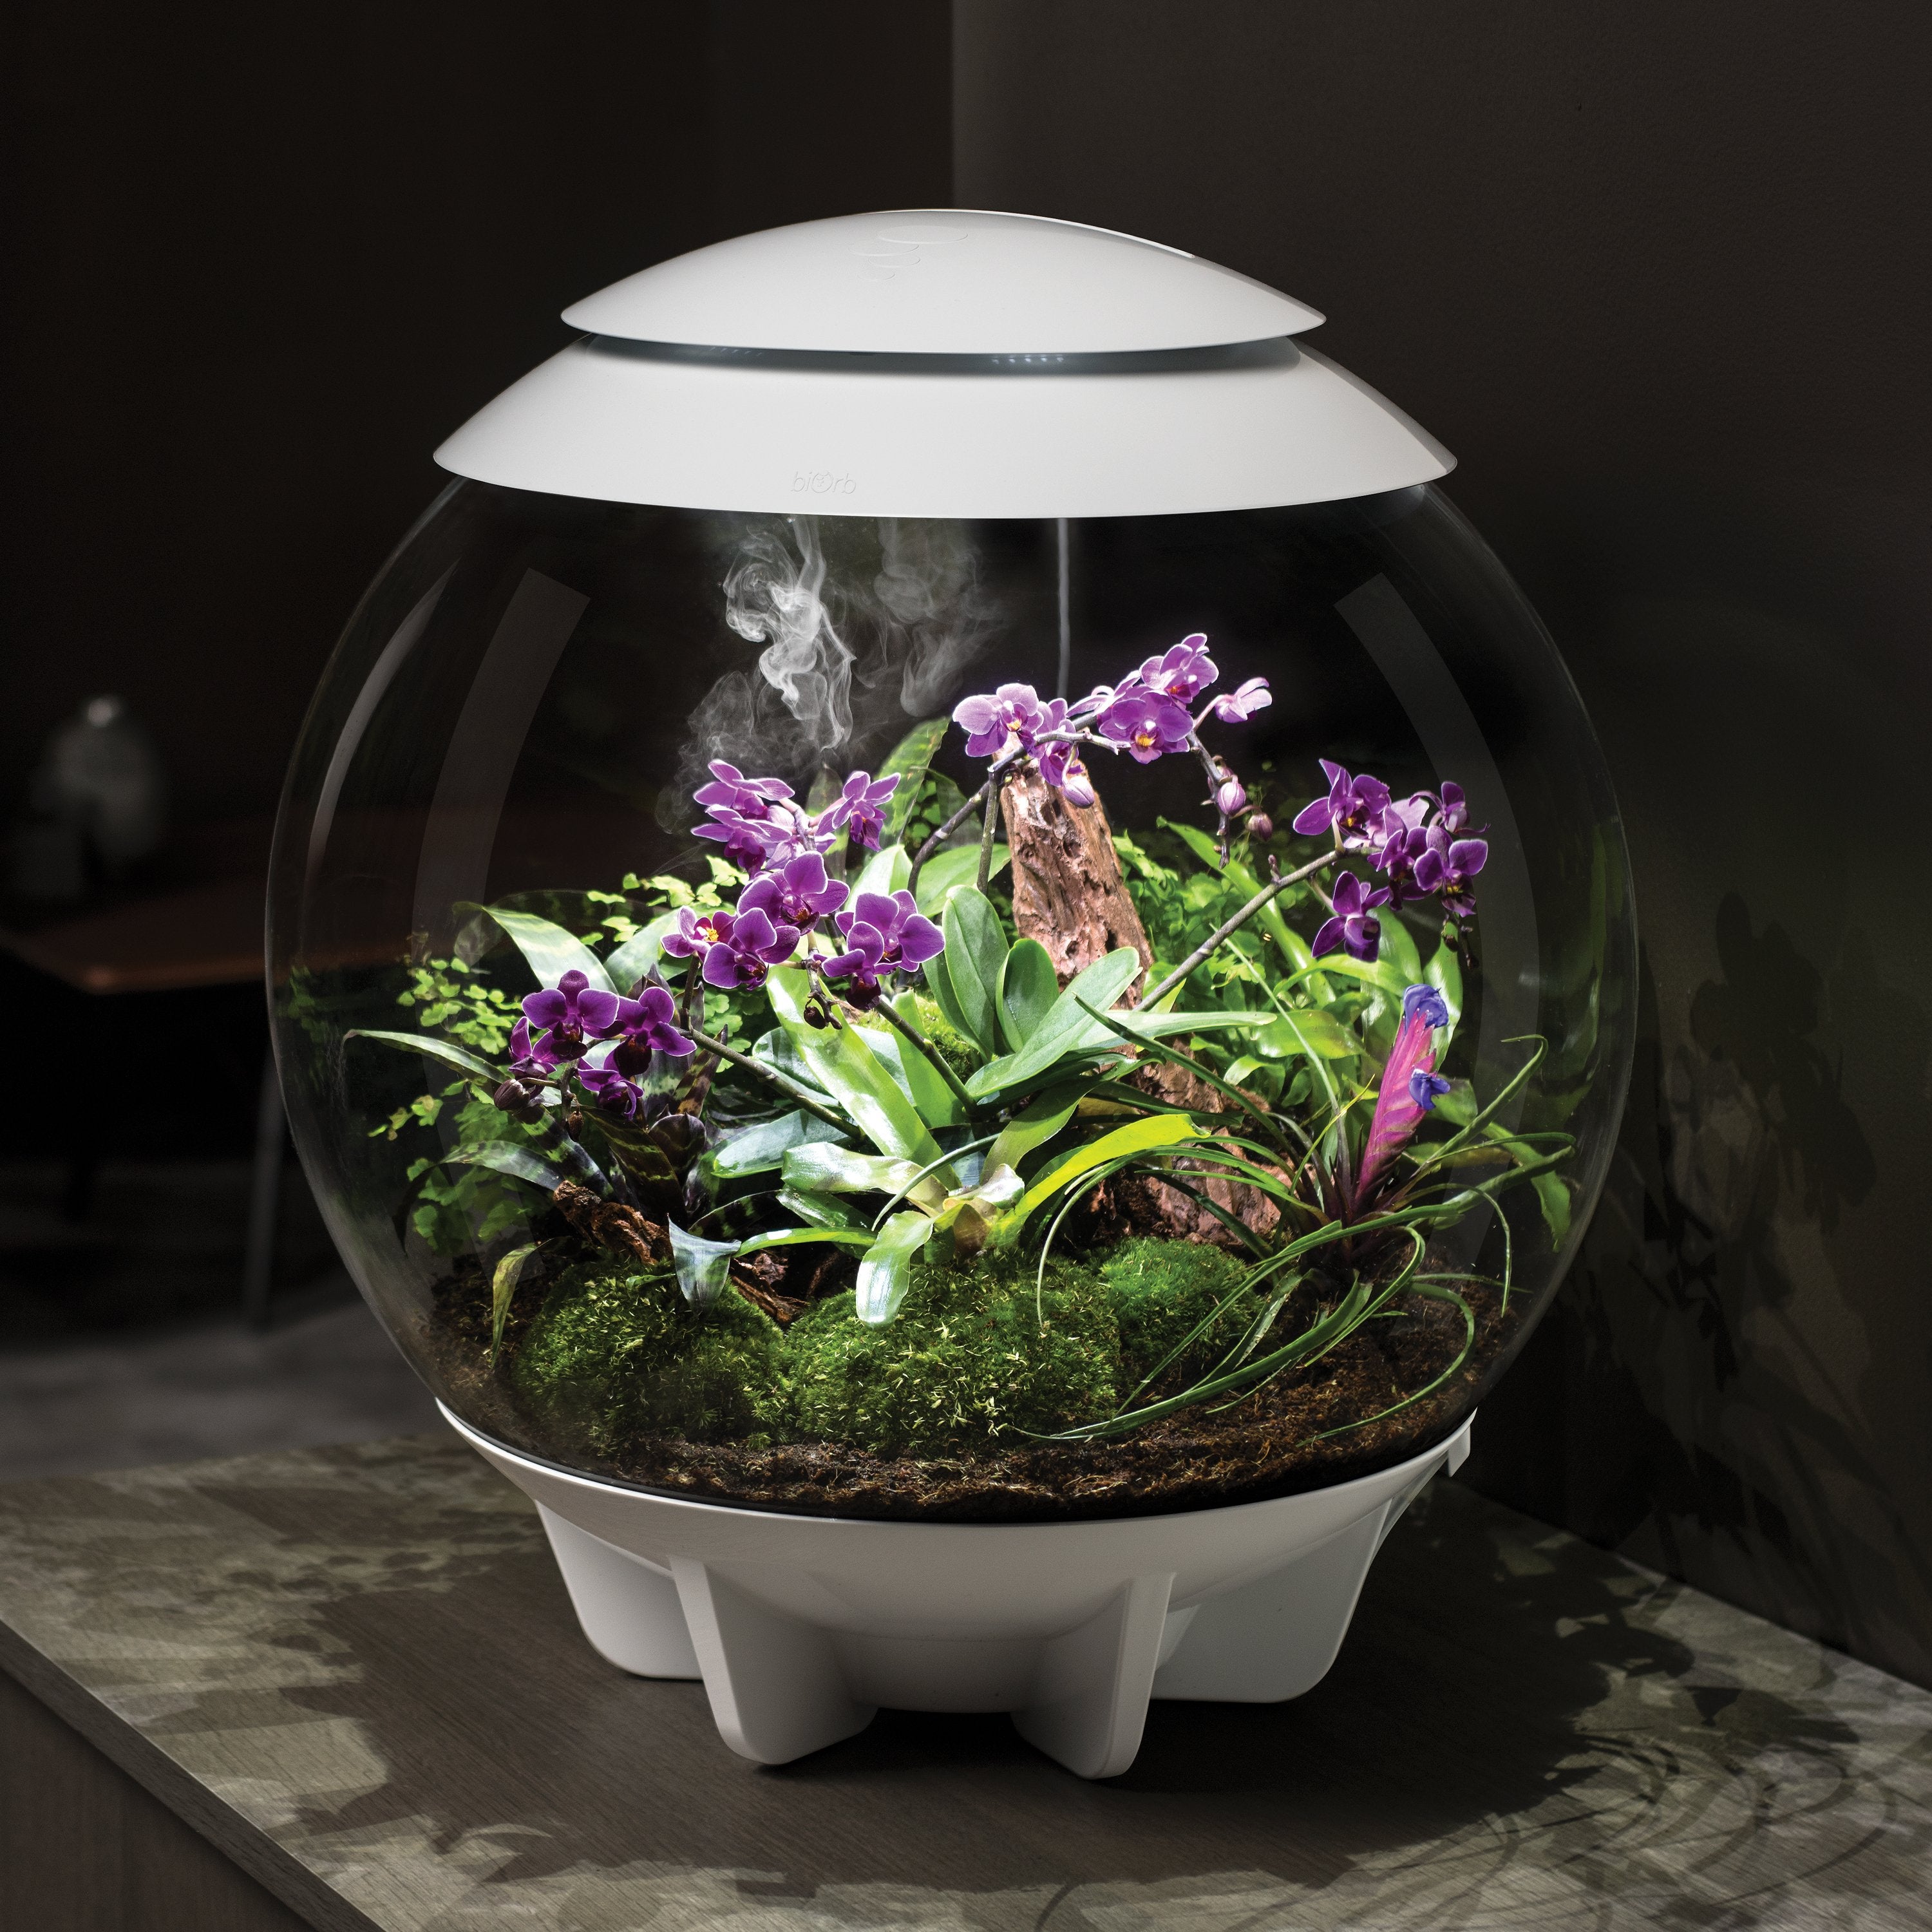 The biOrb AIR terrarium is a fully-automated 360-degree terrarium that replicates the natural conditions found under the tropical forest canopy